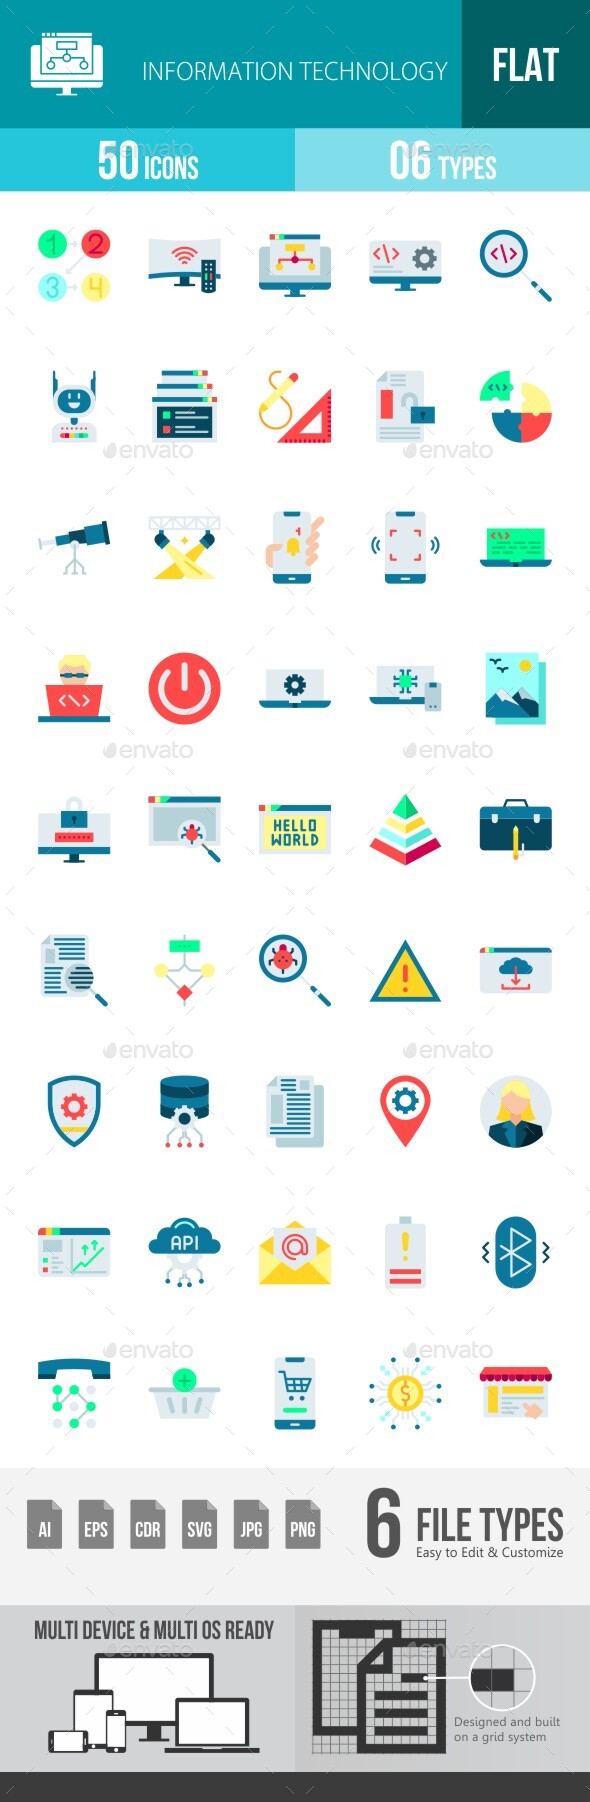 Information Technology Flat Multicolor Icons